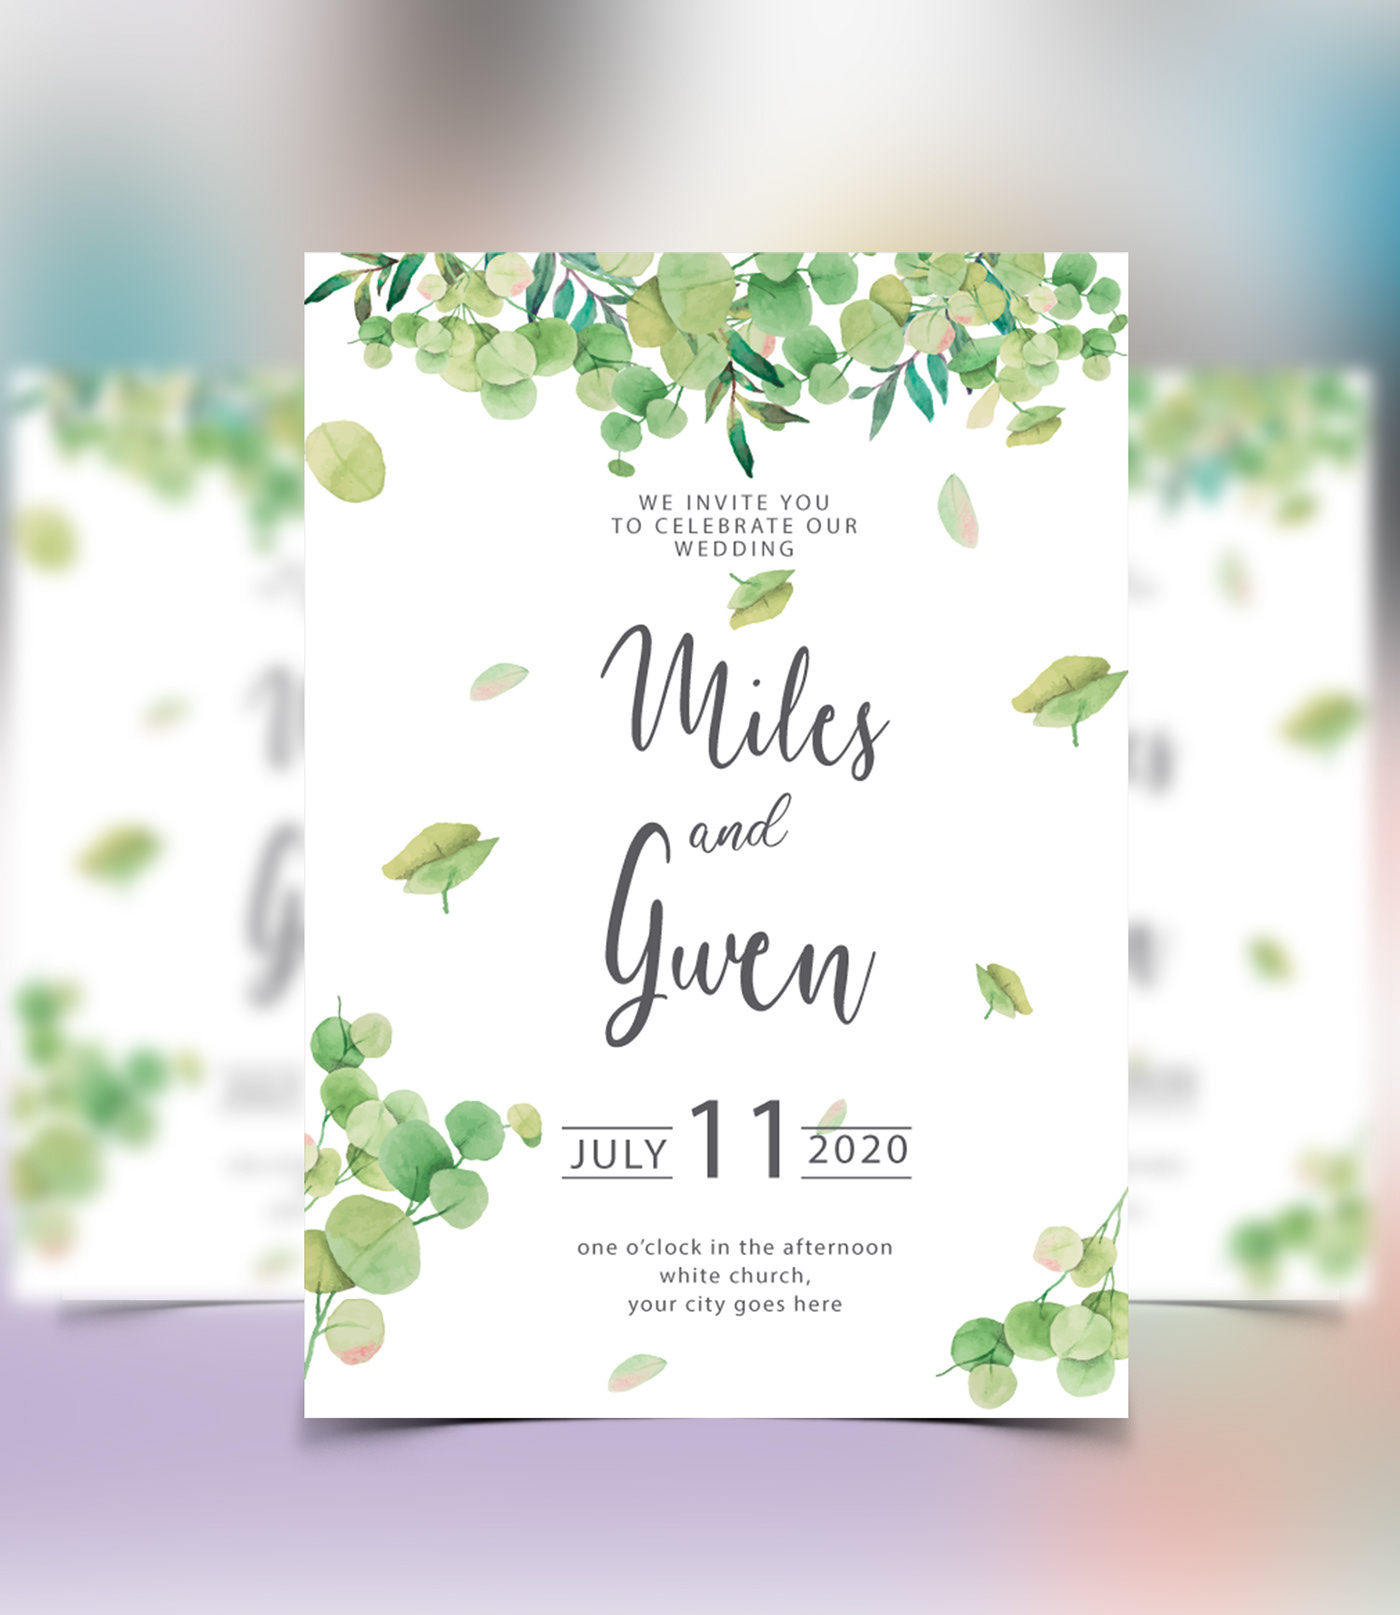 Save the date wedding templates on Behance For Save The Date Business Event Templates